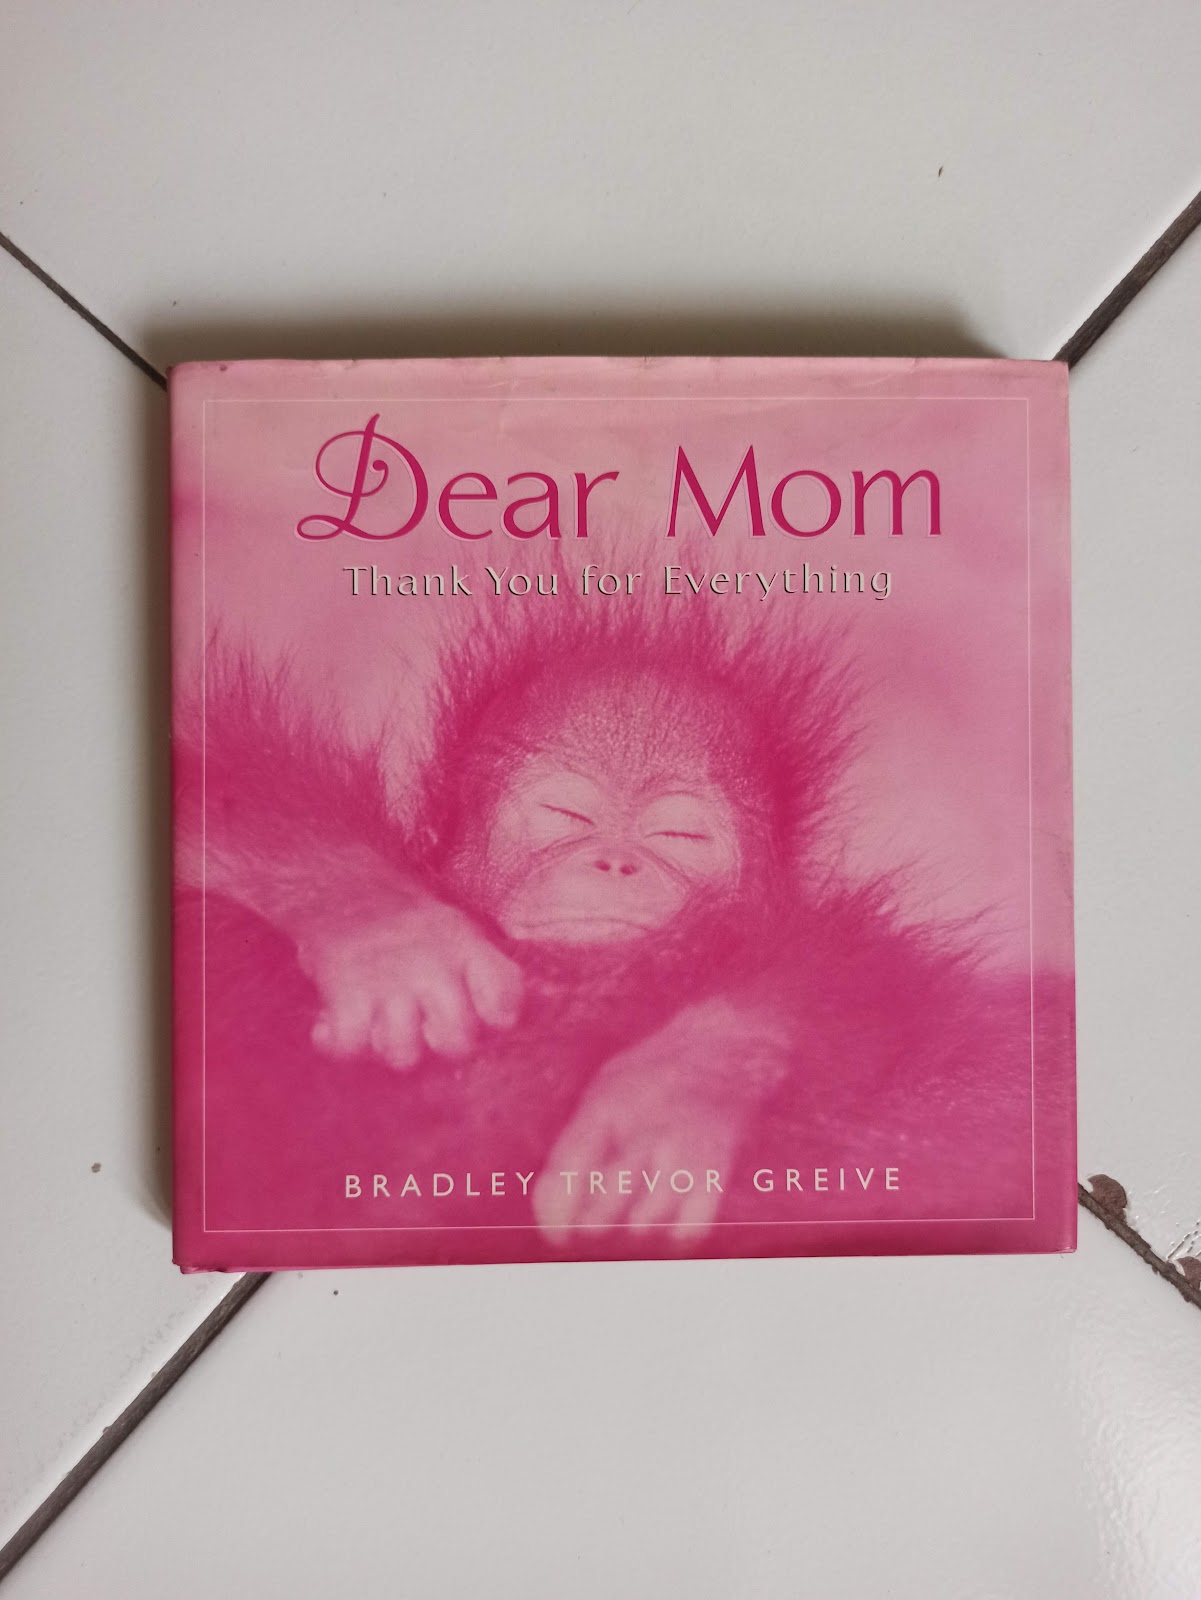 Dear Mom : Thank You for Everything